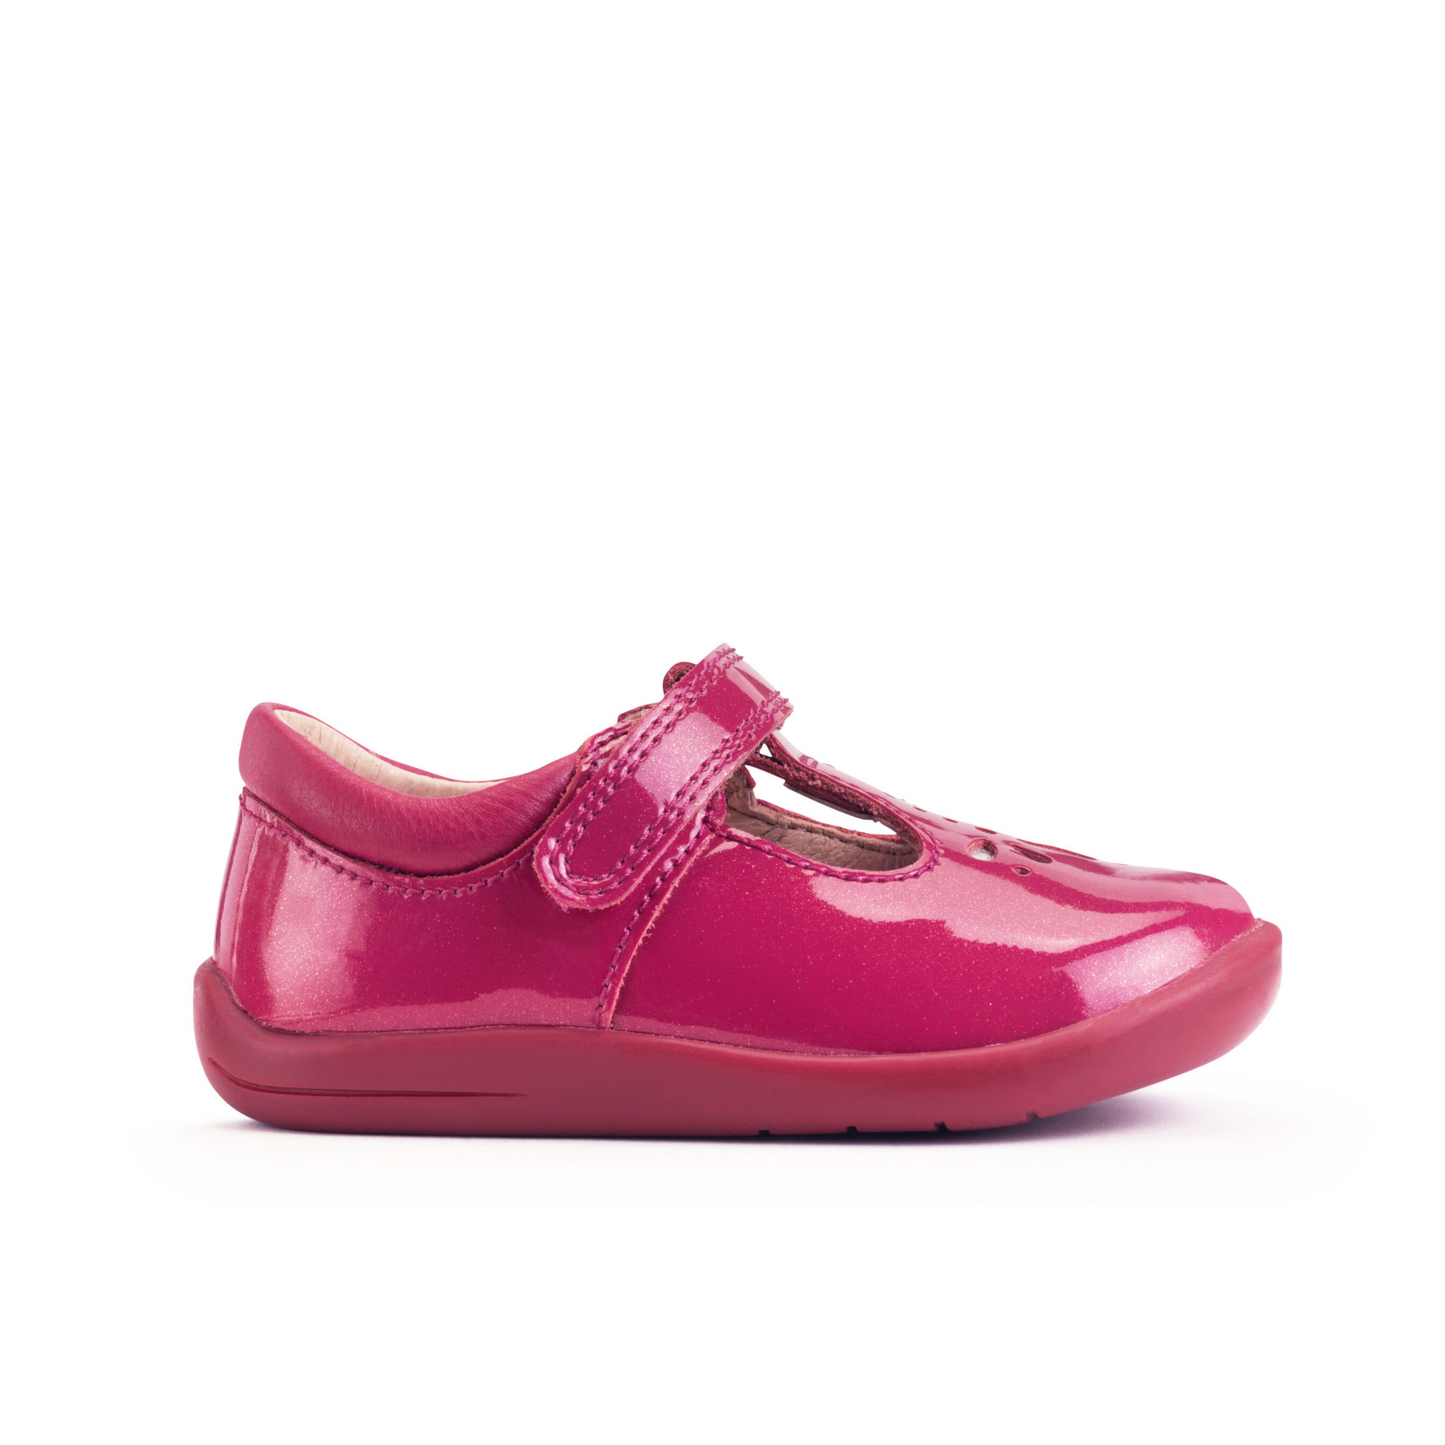 Puzzle Ruby Red Glitter Patent Girl's First Walking Shoe